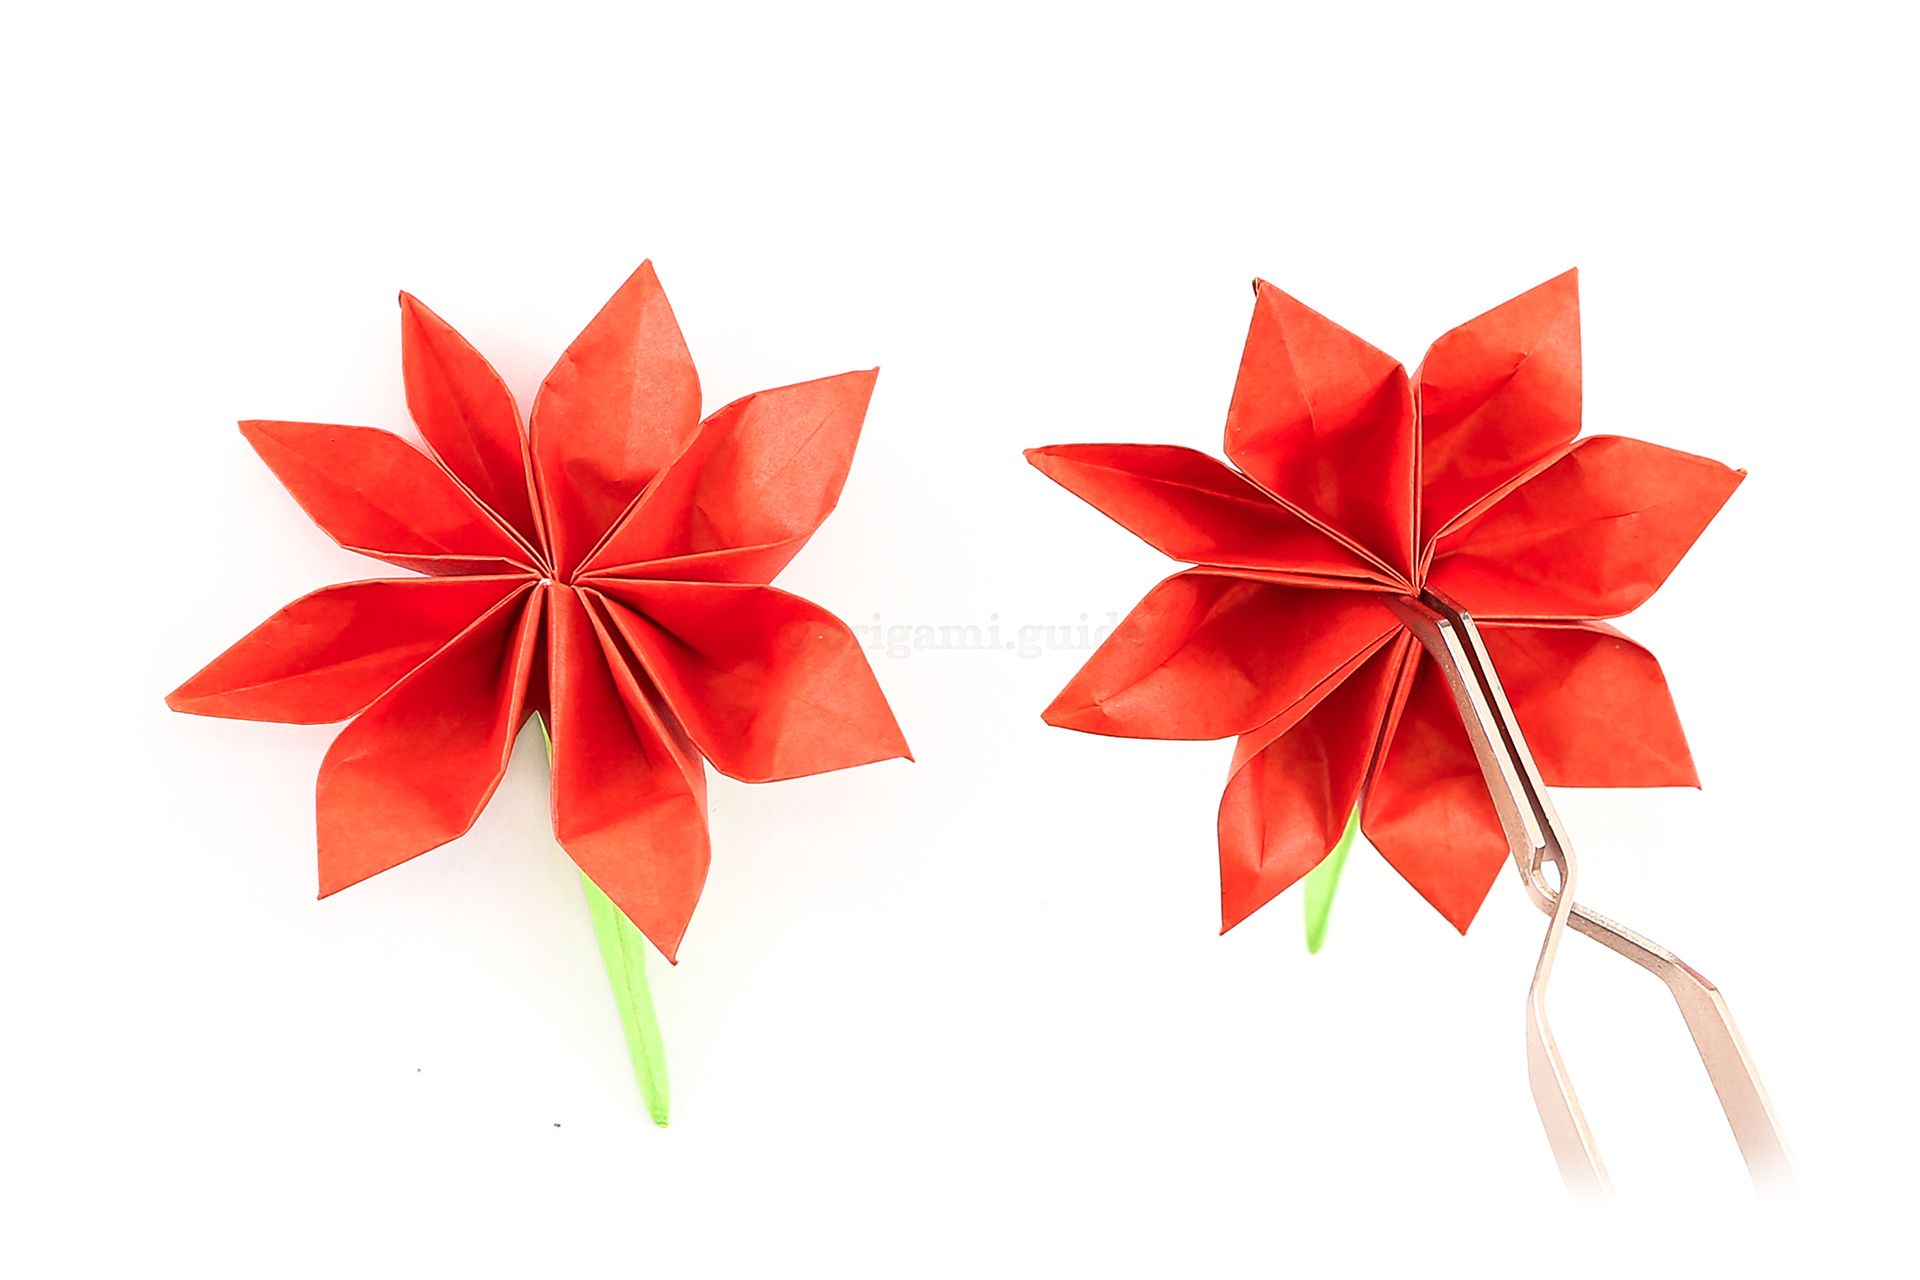 Once you are happy with the petals, you can carefully pinch the centre of the flower to finalise the folds, using some tweezers is recommended.